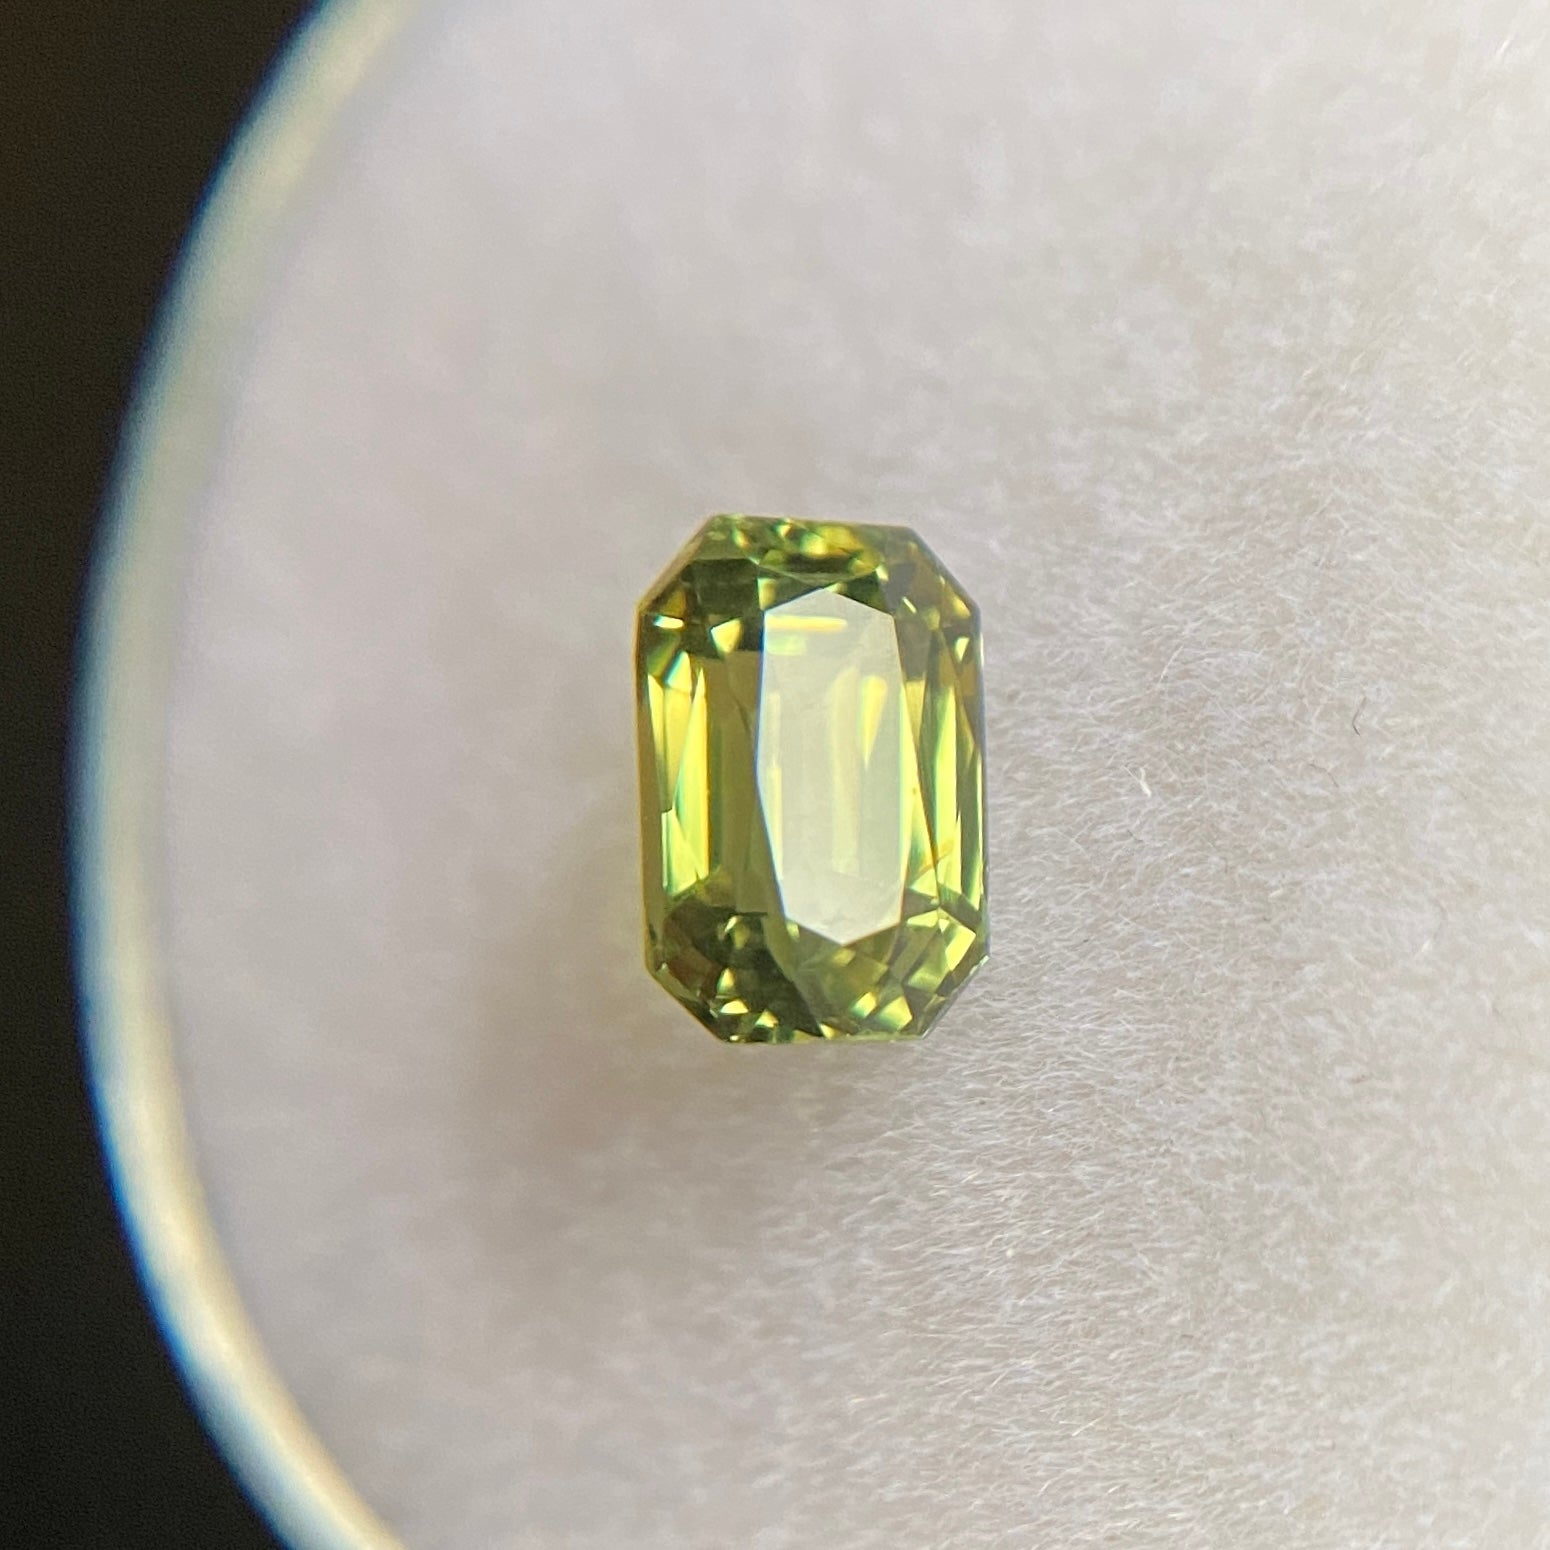 Fine Natural Untreated Australian Green Sapphire Gemstone.

1.12 Carat with a beautiful yellow green colour and an excellent emerald octagon cut. Also has very good clarity, a very clean stone.

Totally untreated and unheated, very rare for natural